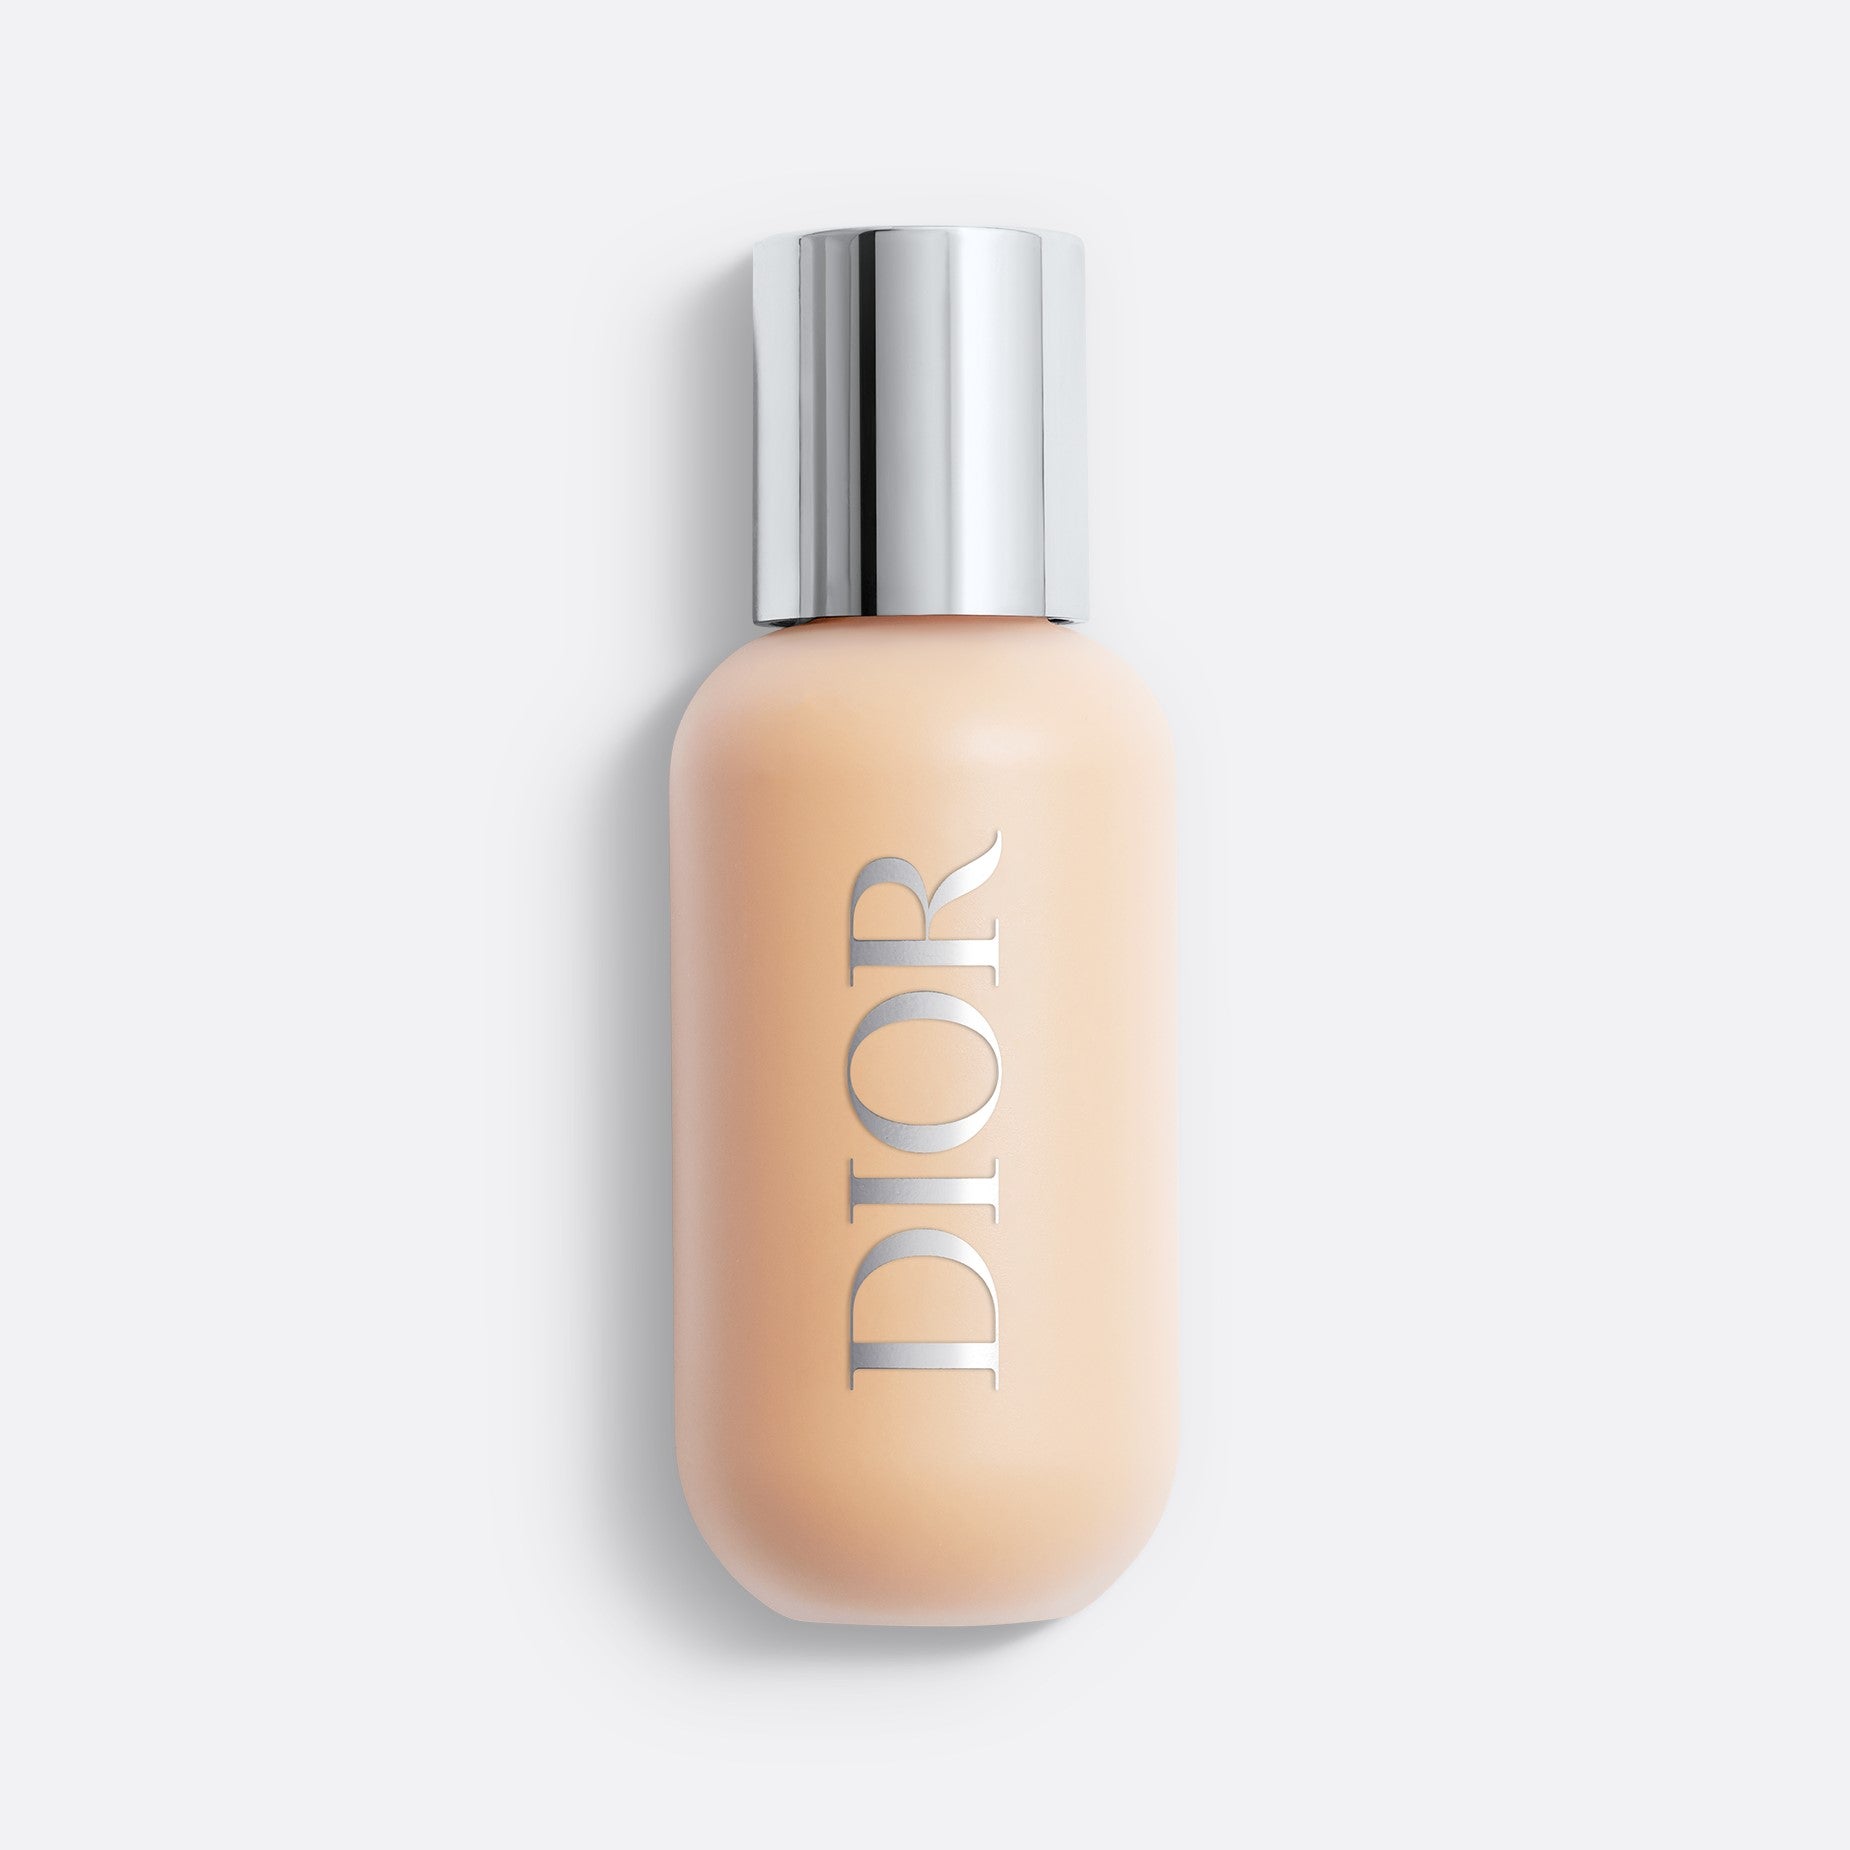 DIOR BACKSTAGE FACE & BODY FOUNDATION | Face and Body Foundation - Second-Skin Effect Natural Finish - Resistant to Water and Heat